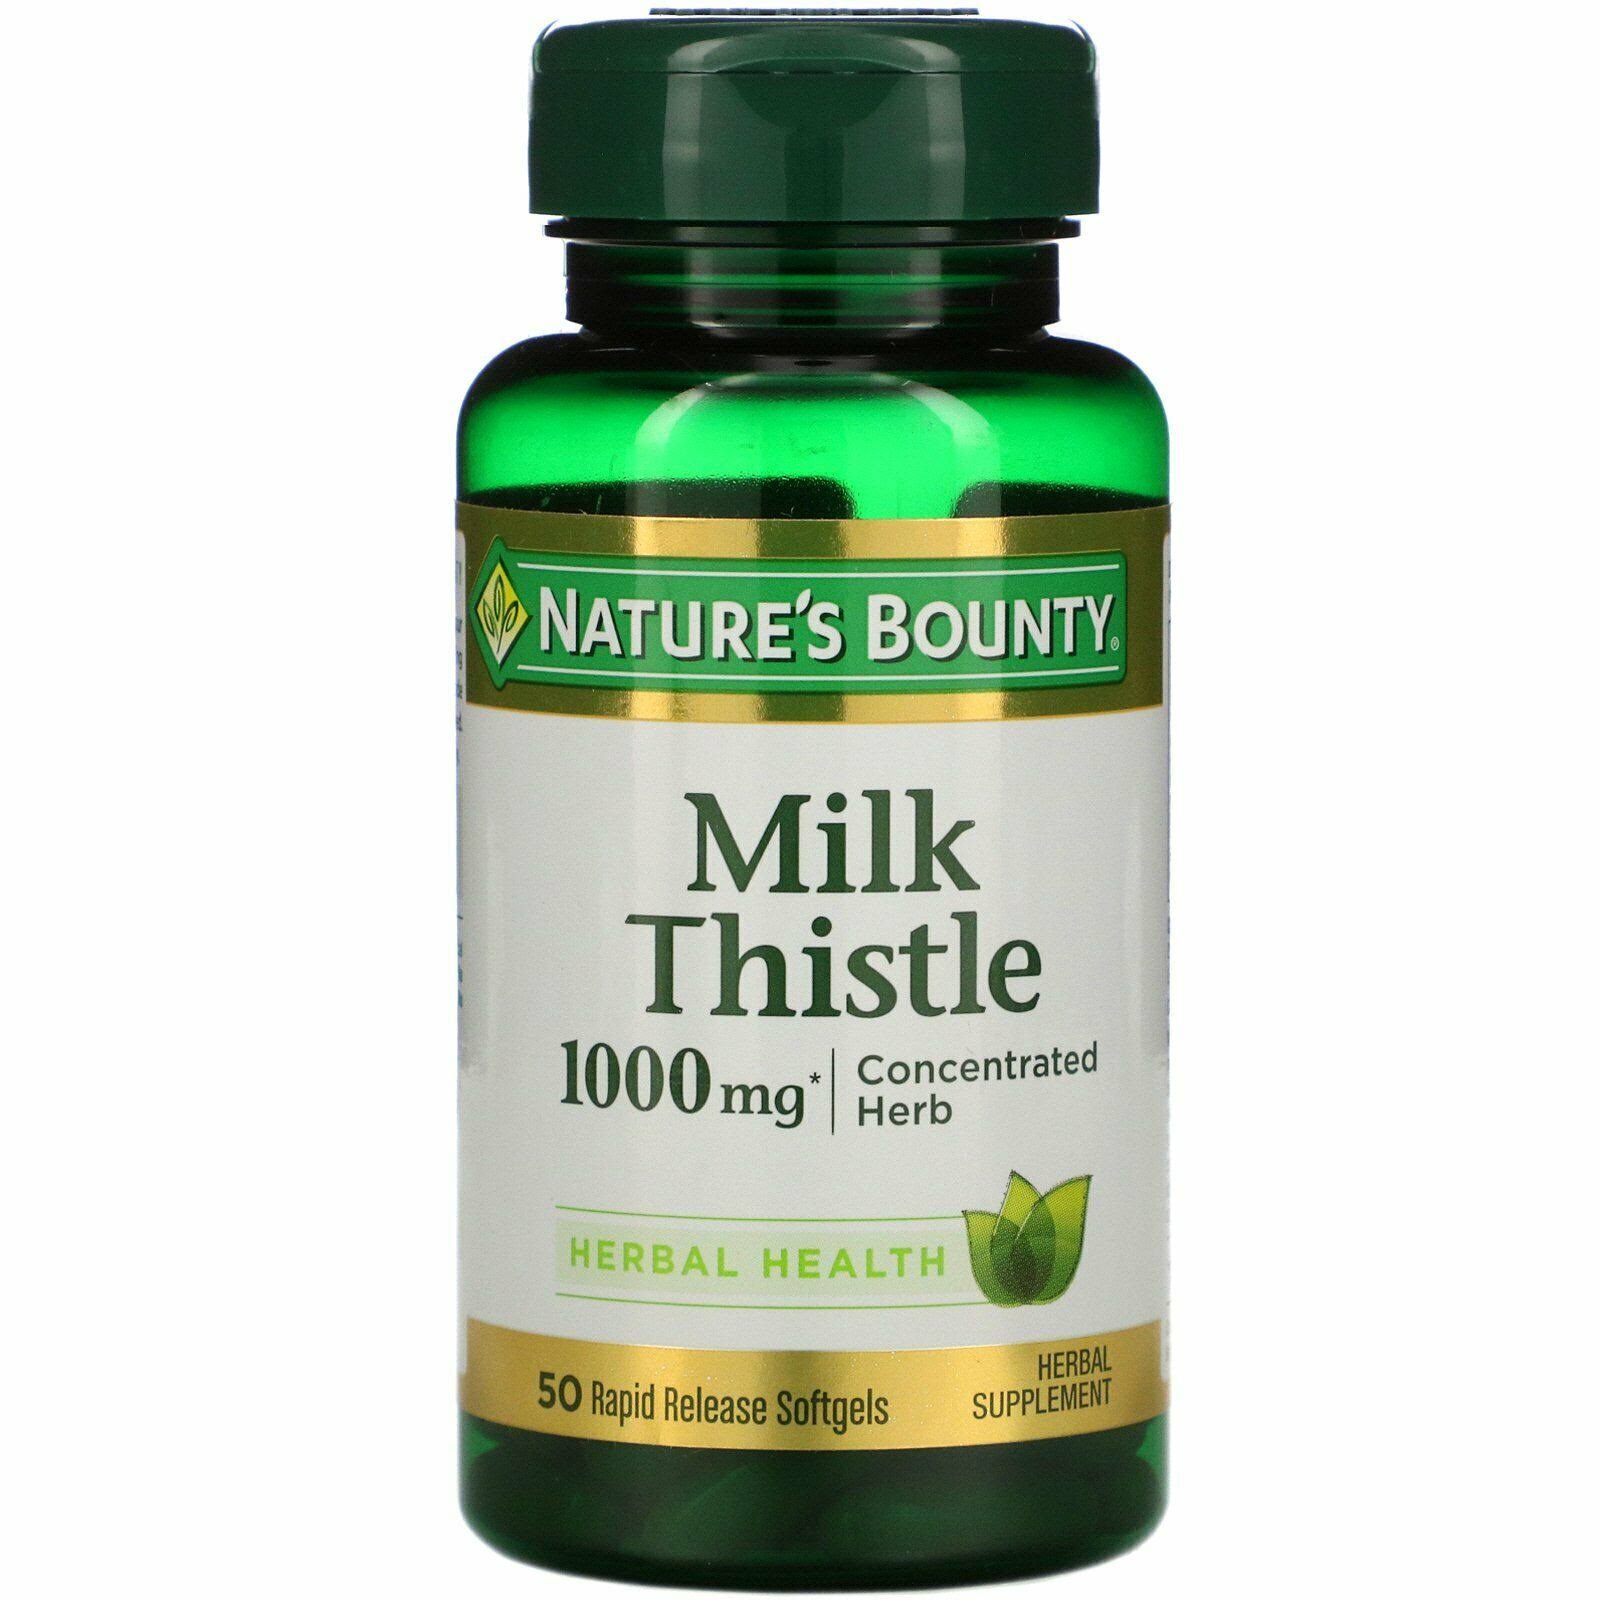 Nature's Bounty Milk Thistle Concentrated Herb Rapid Release